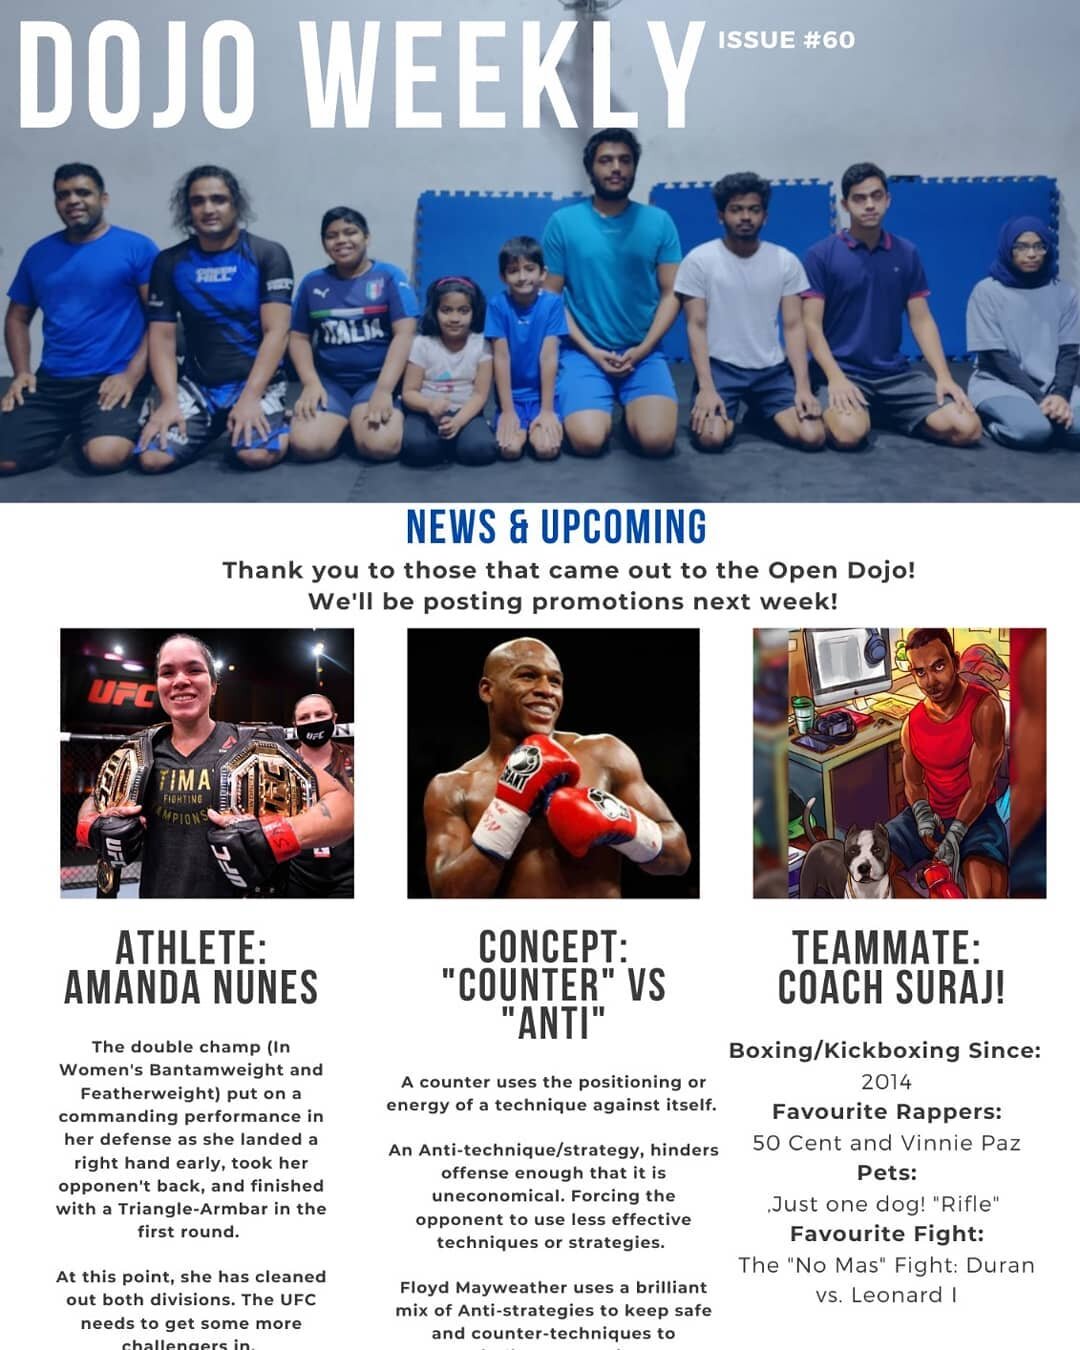 📰 Issue 60: #amandanunes , #counter vs #Anti, and getting to know Coach Suraj ( @_._rumble_in_the_jungle_._ ) 

🥊

#mma #mmanews #boxing #boxingnews #newsletter #team #dojoweekly #ufc #bjj #gymnews